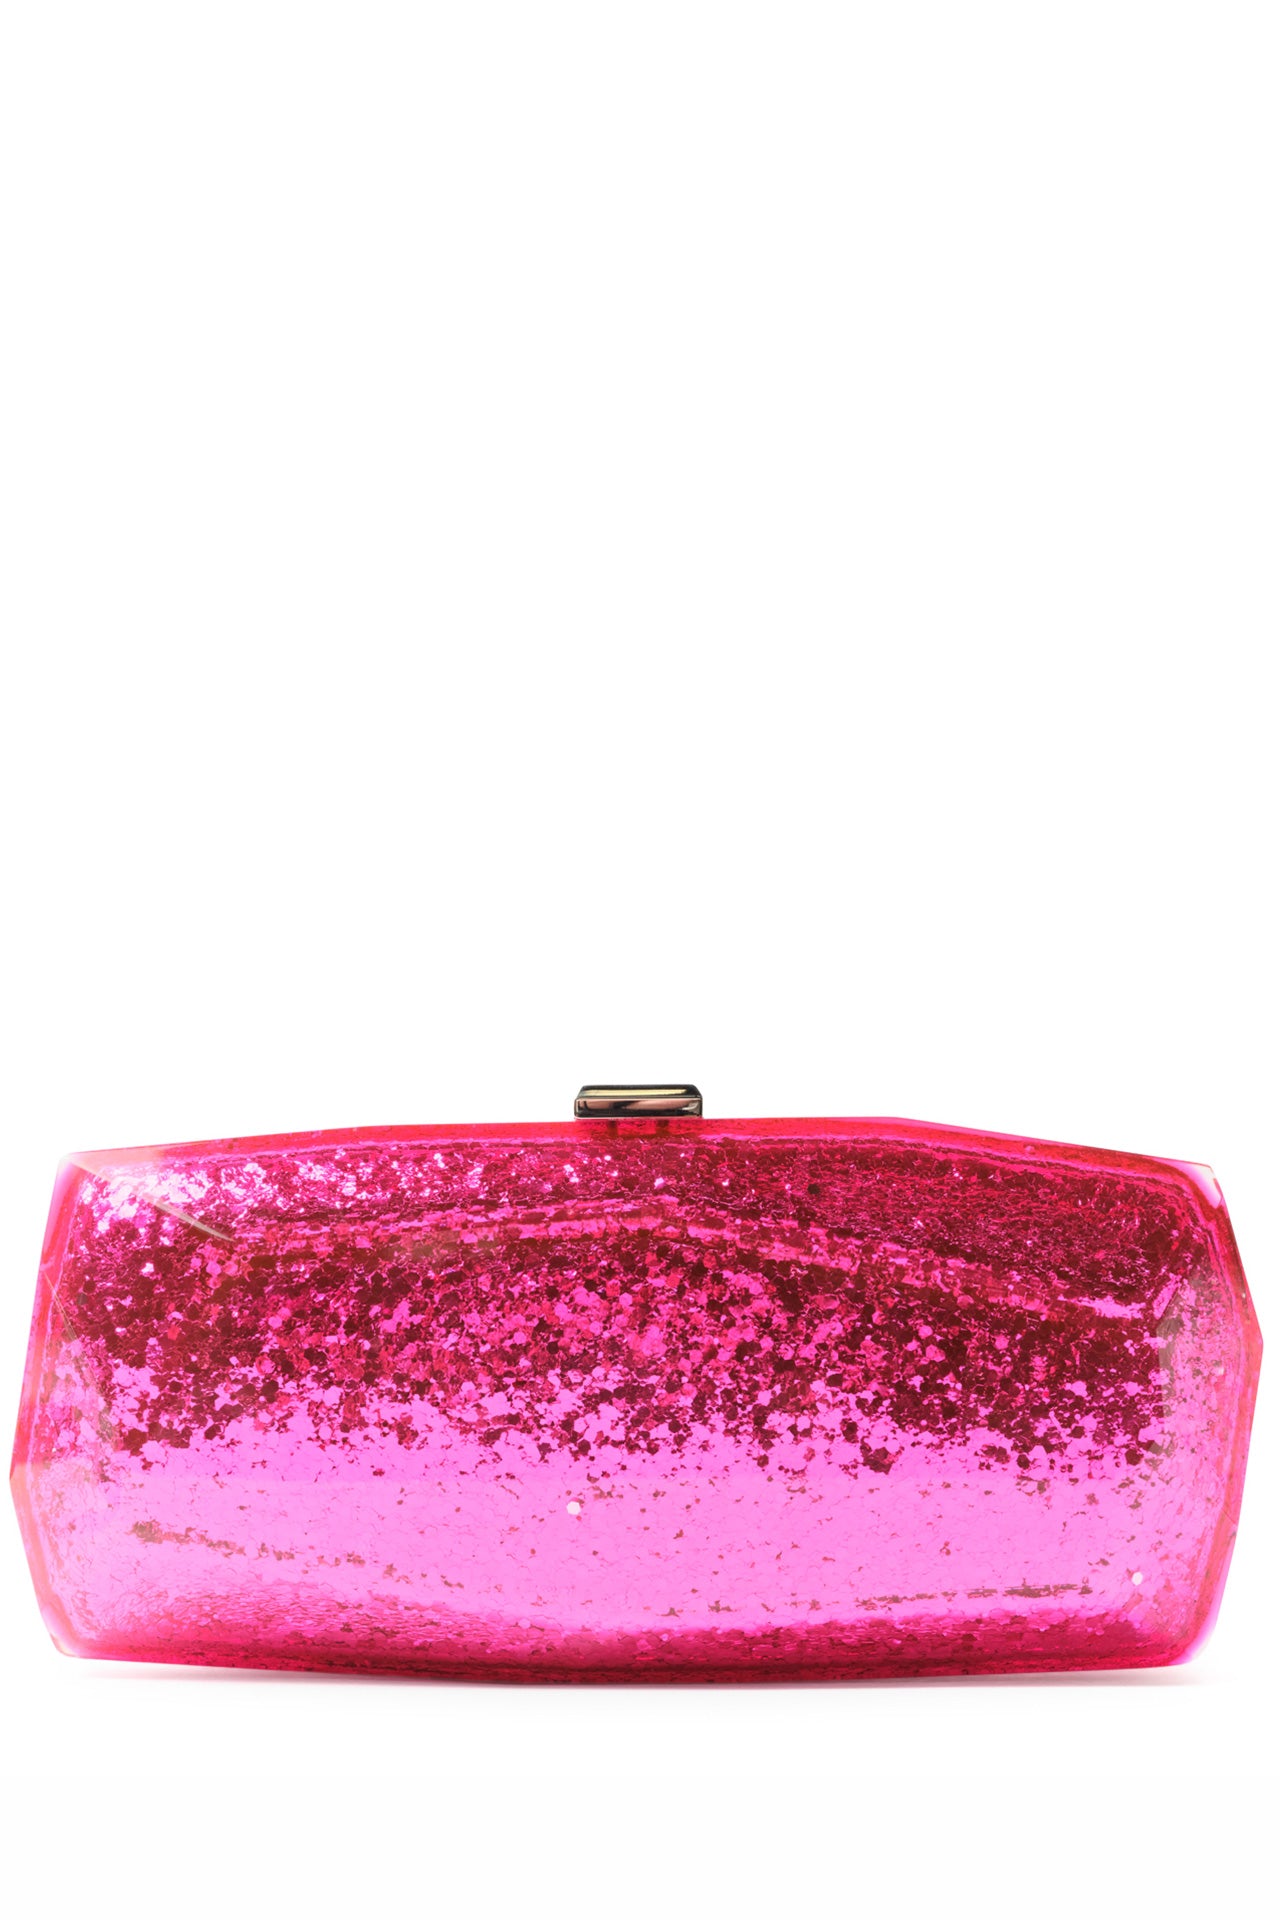 Monique Lhuillier lucite faceted minaudière handbag in Fuchsia Glitter with detachable chain - front without chain.